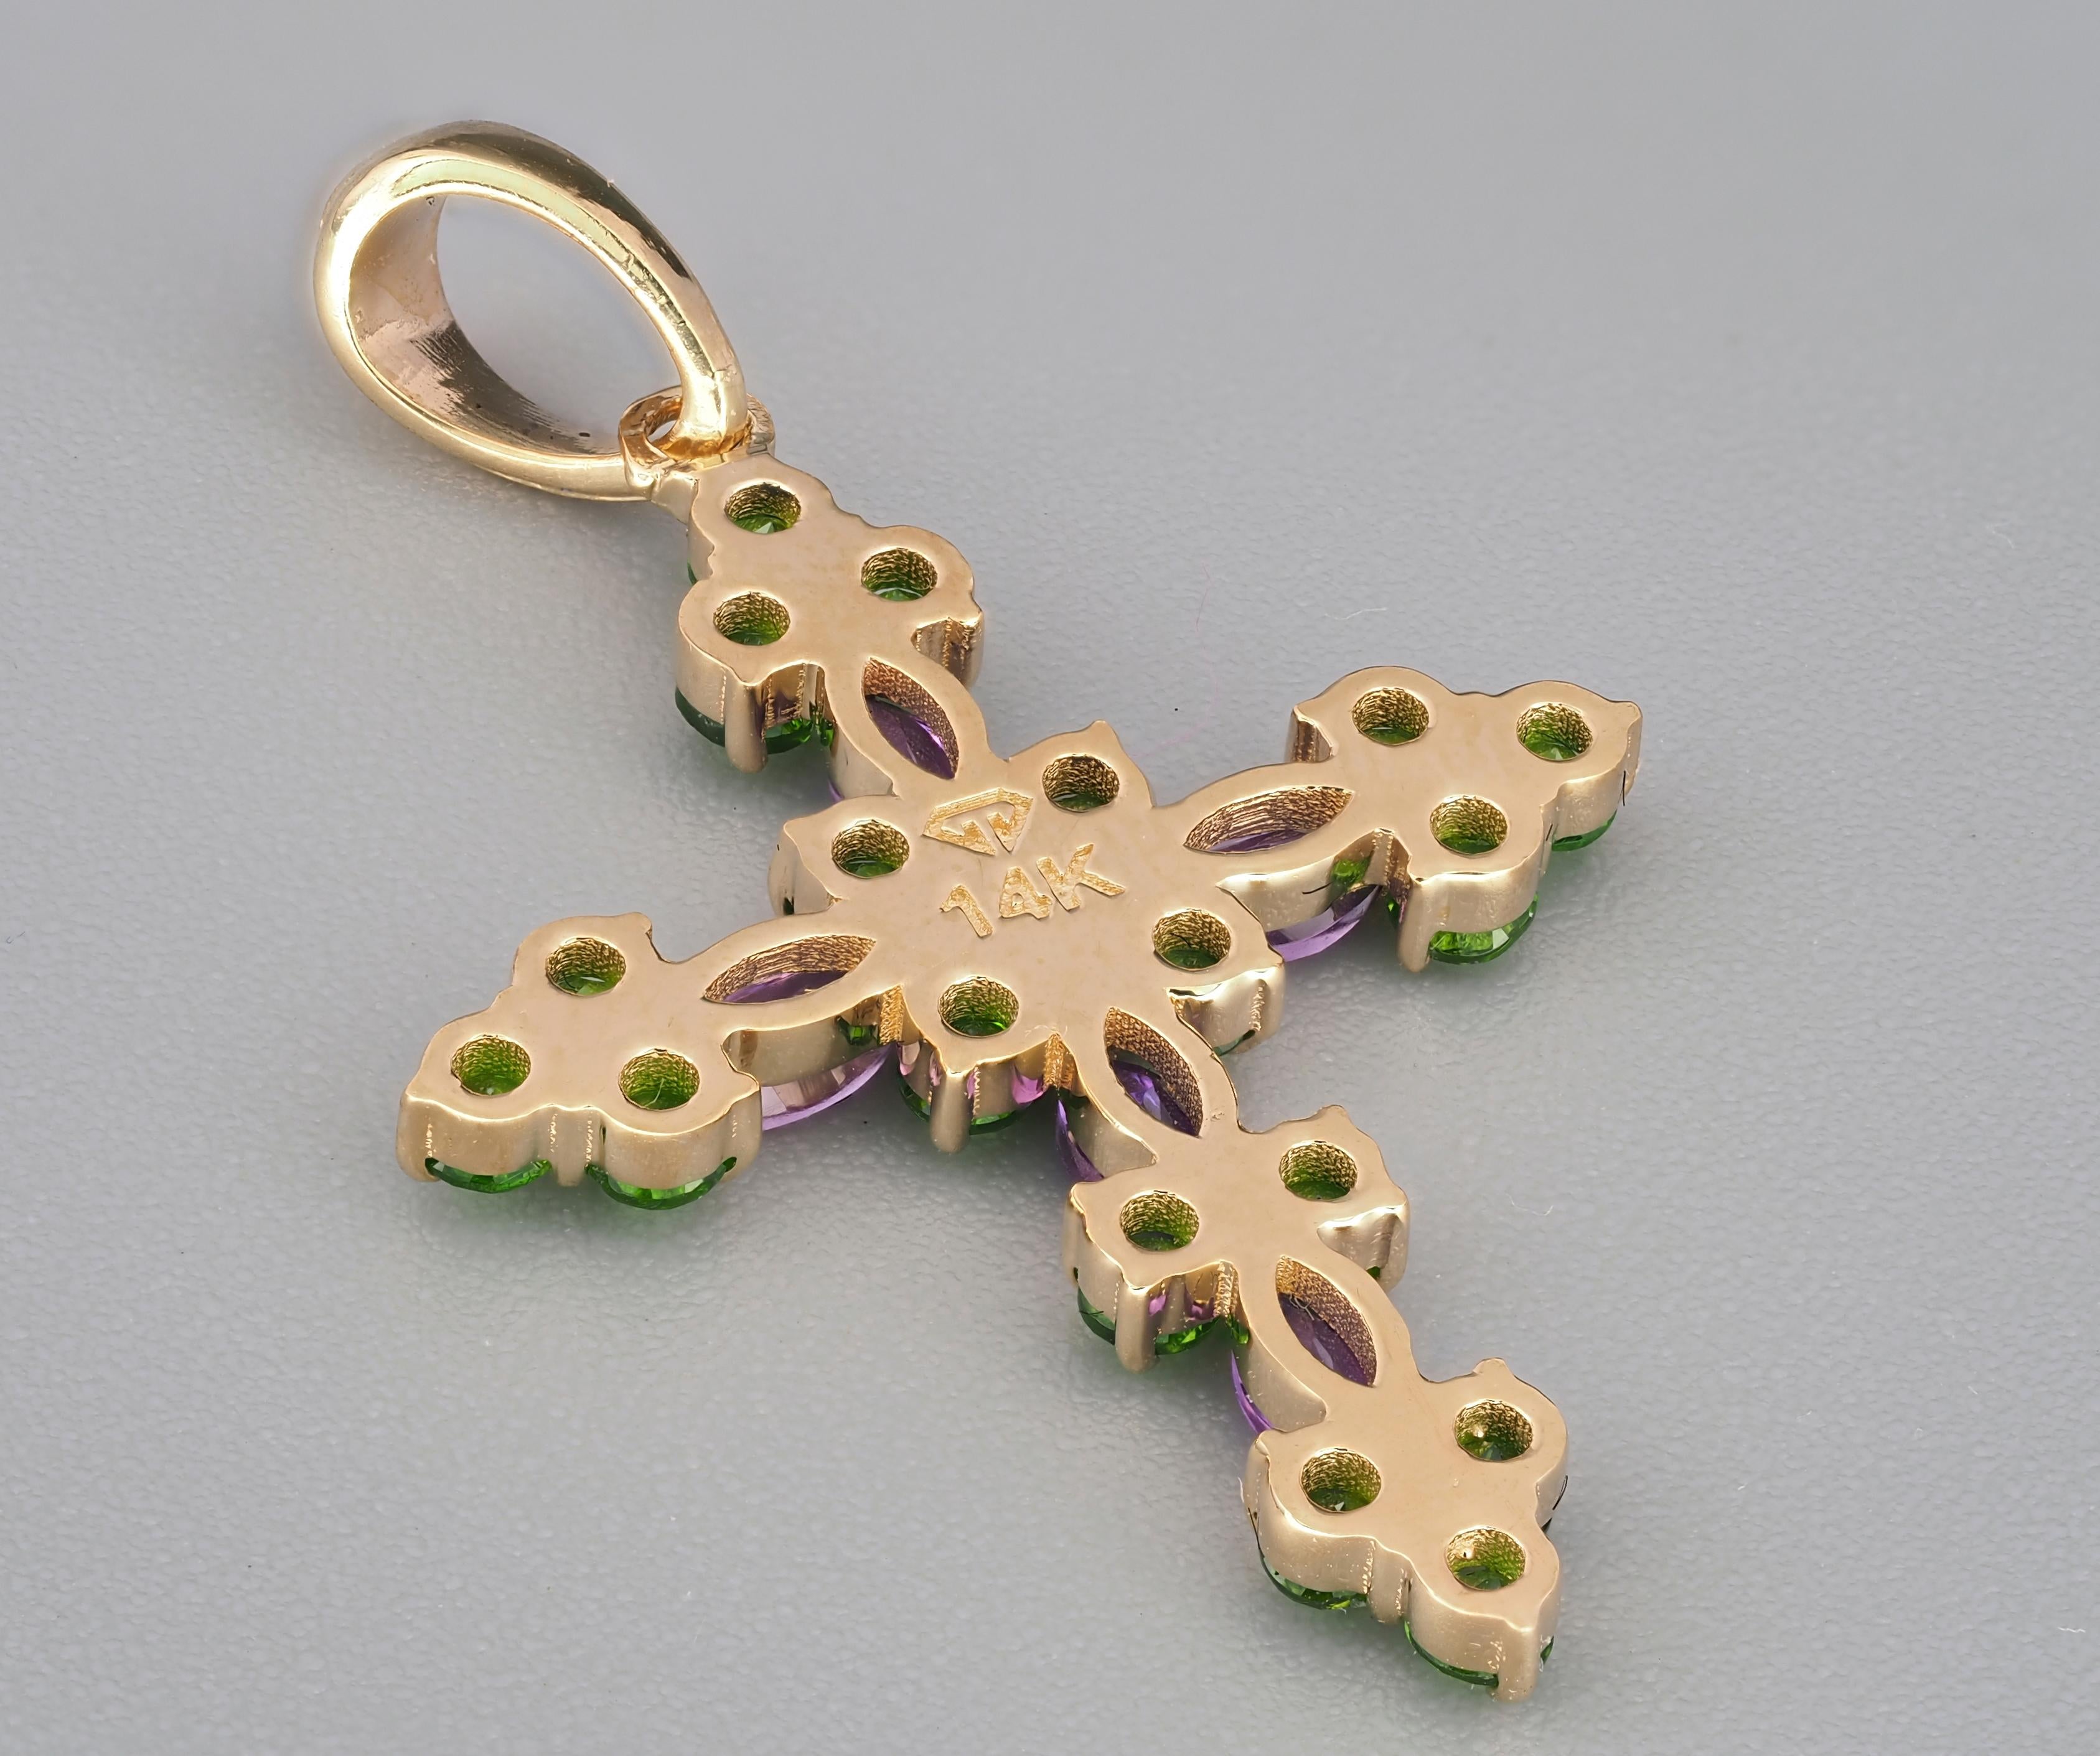 Modern 14k Gold Cross Pendant with Colored Stones: Amethysts and Tsavorites! For Sale